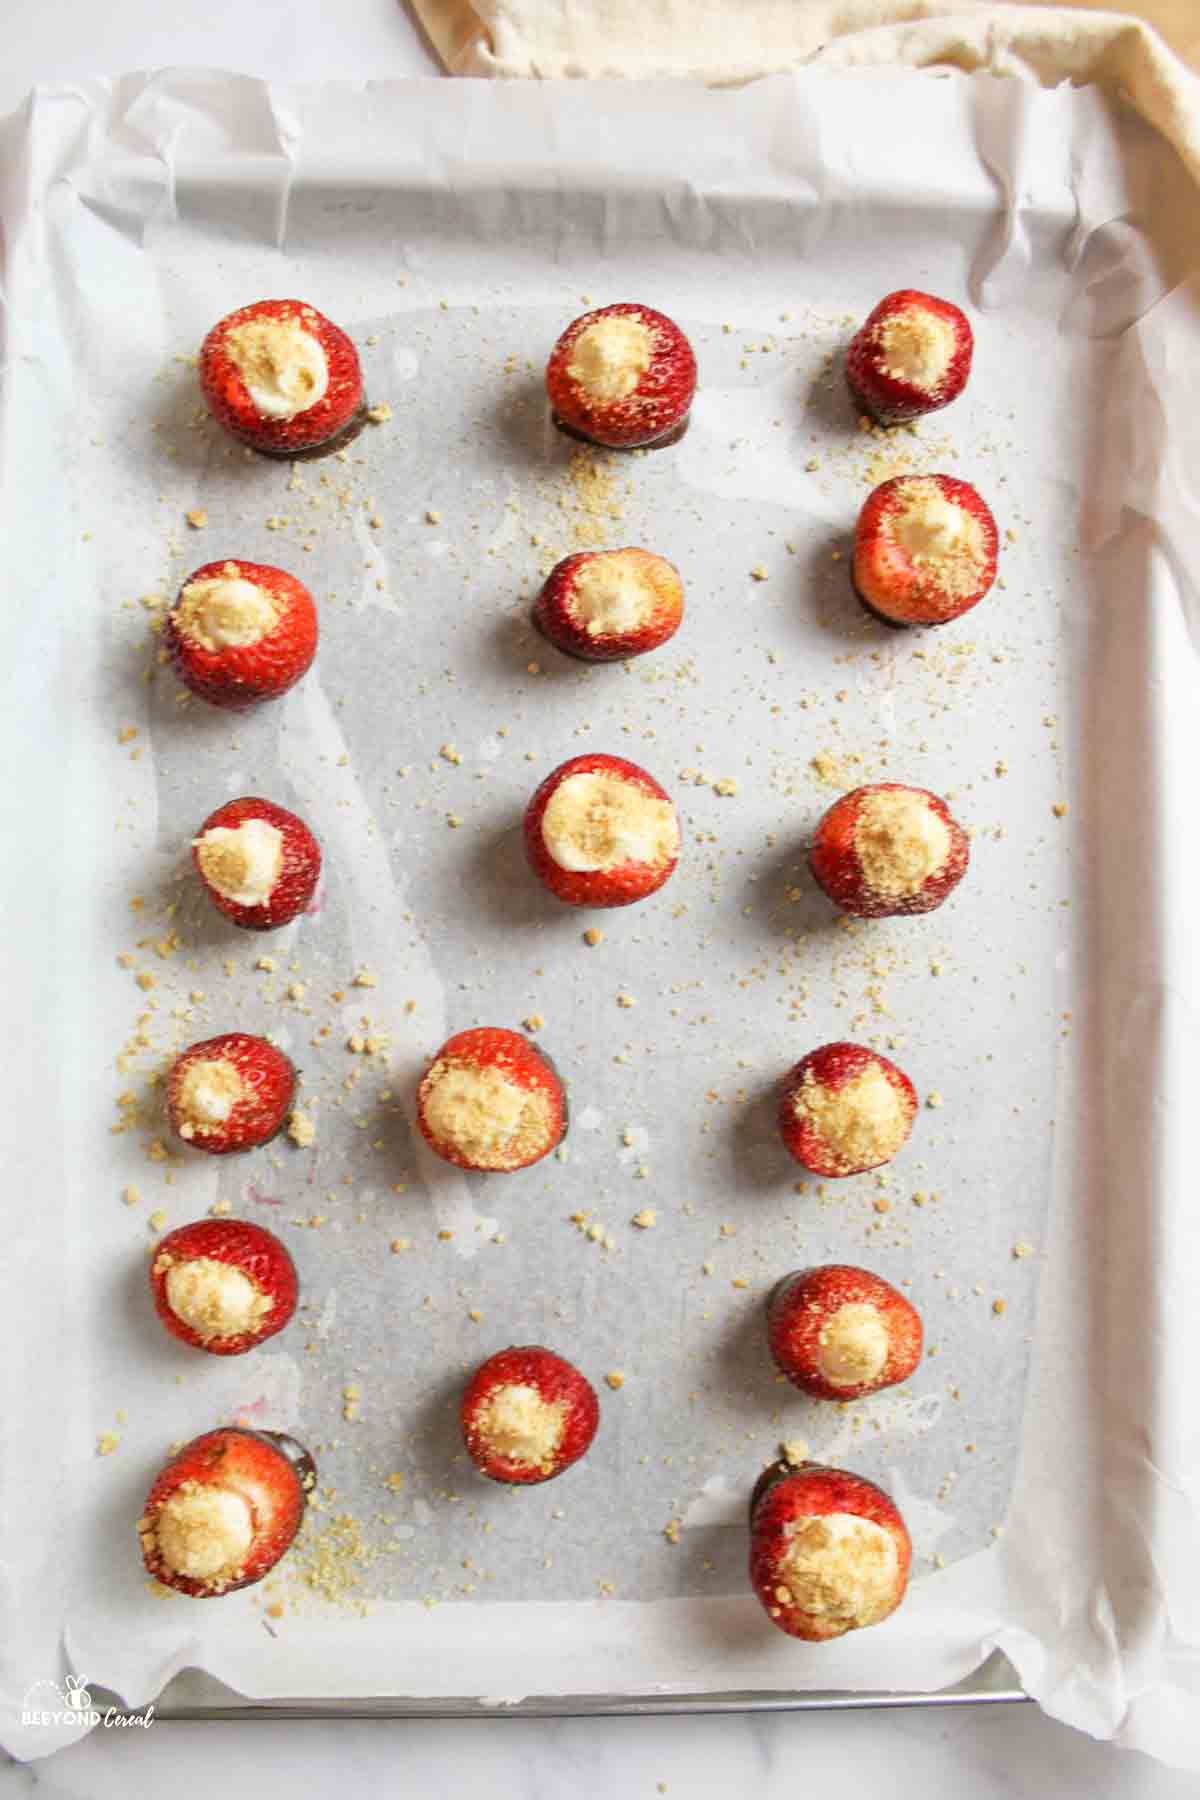 graham cracker crumb topped cheesecake stuffed strawberries on parchment paper lined baking sheet